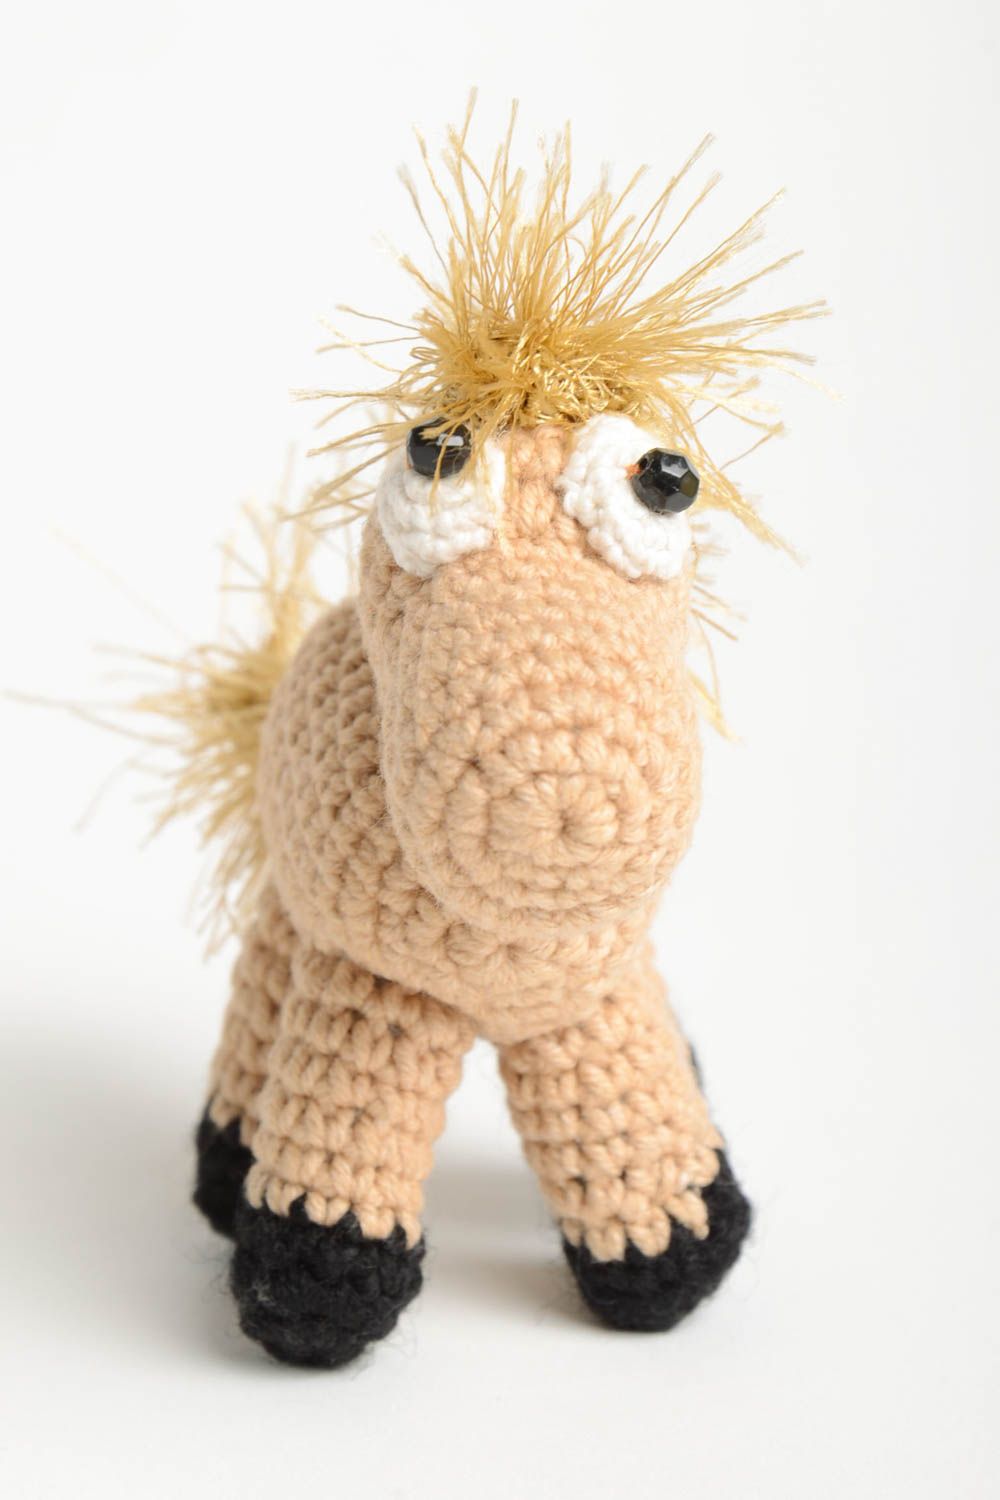 Cute crocheted horse handmade decorative toy soft toy textile designer toy photo 2